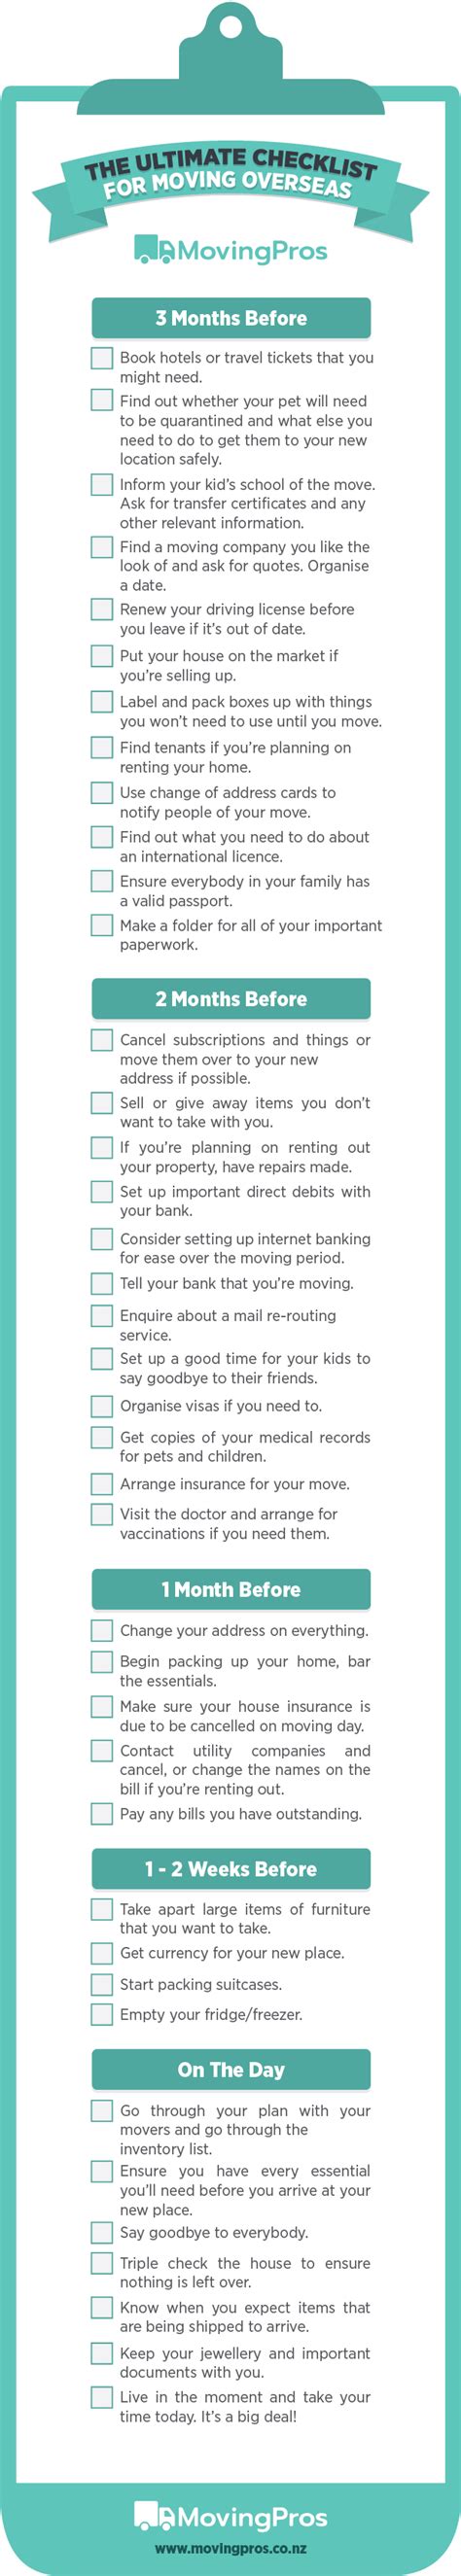 The Best Moving Overseas Checklist Infographic Download Movingpros